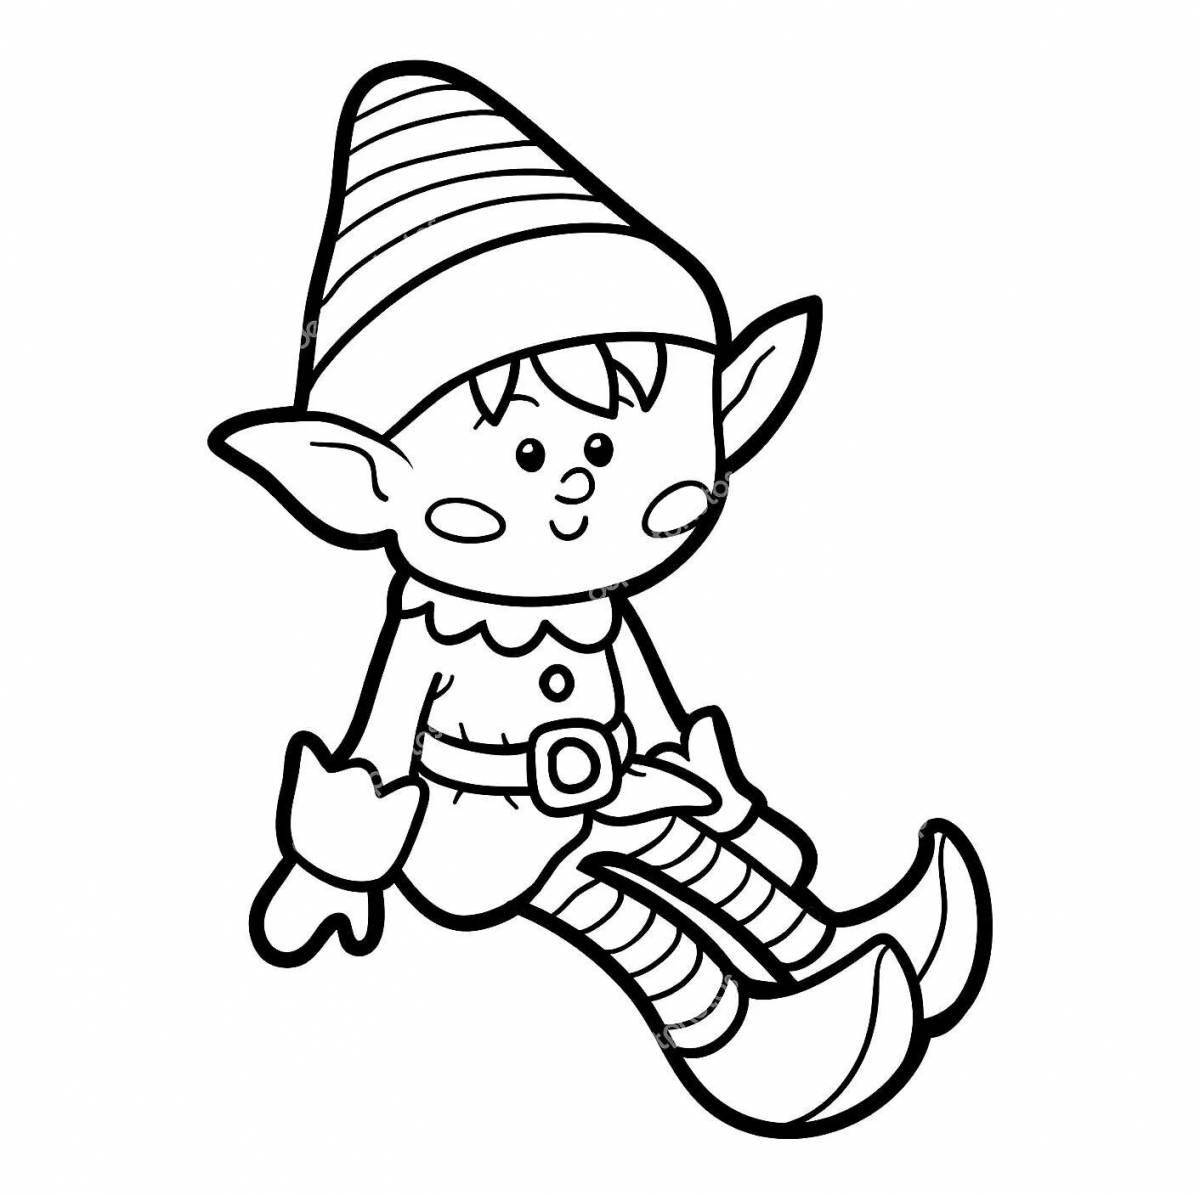 Exciting Christmas elf coloring book